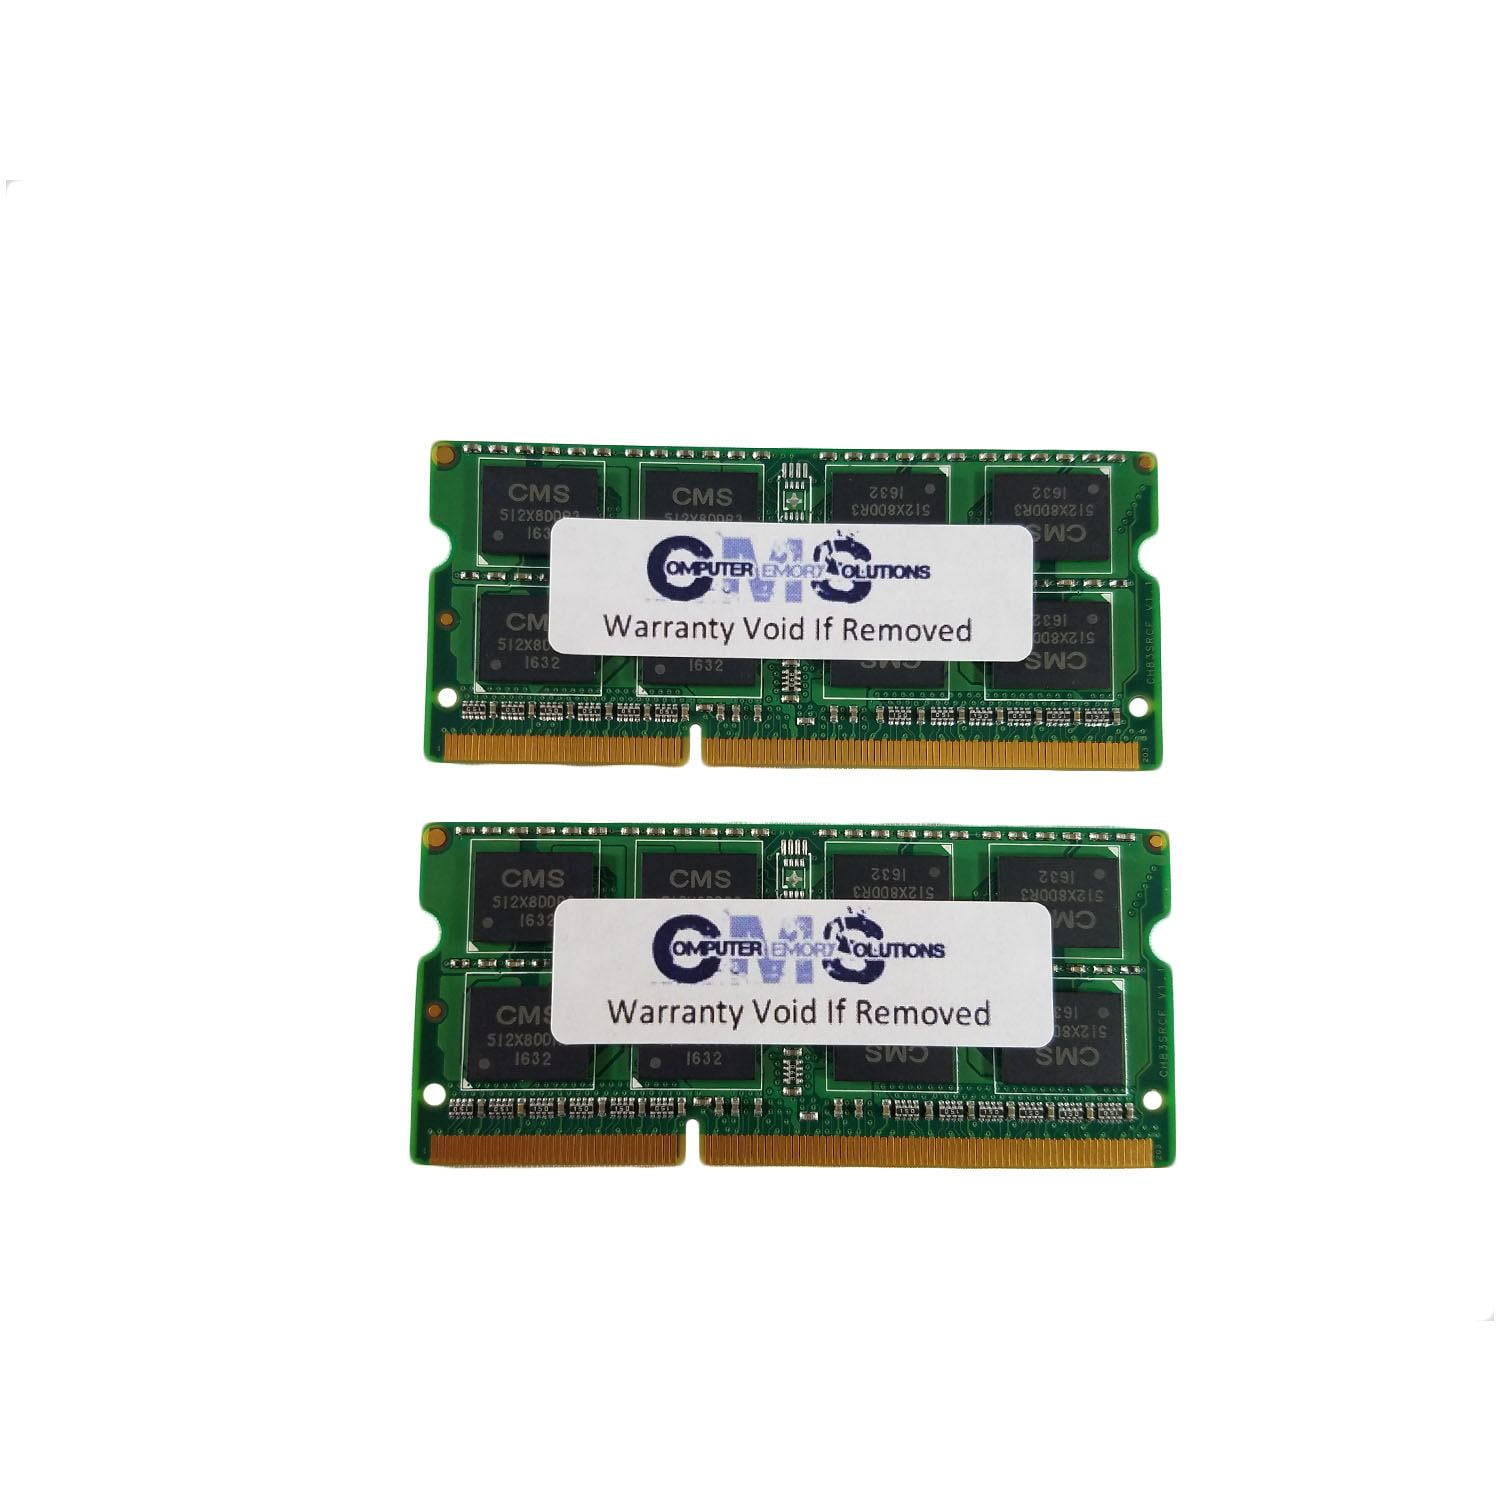 A35 DDR3 8500 1066MHZ Non ECC SODIMM Memory Ram Upgrade Compatible with Acer® Aspire As7750G-6669 CMS 8GB As7750-6423 2X4GB As7741G-5877